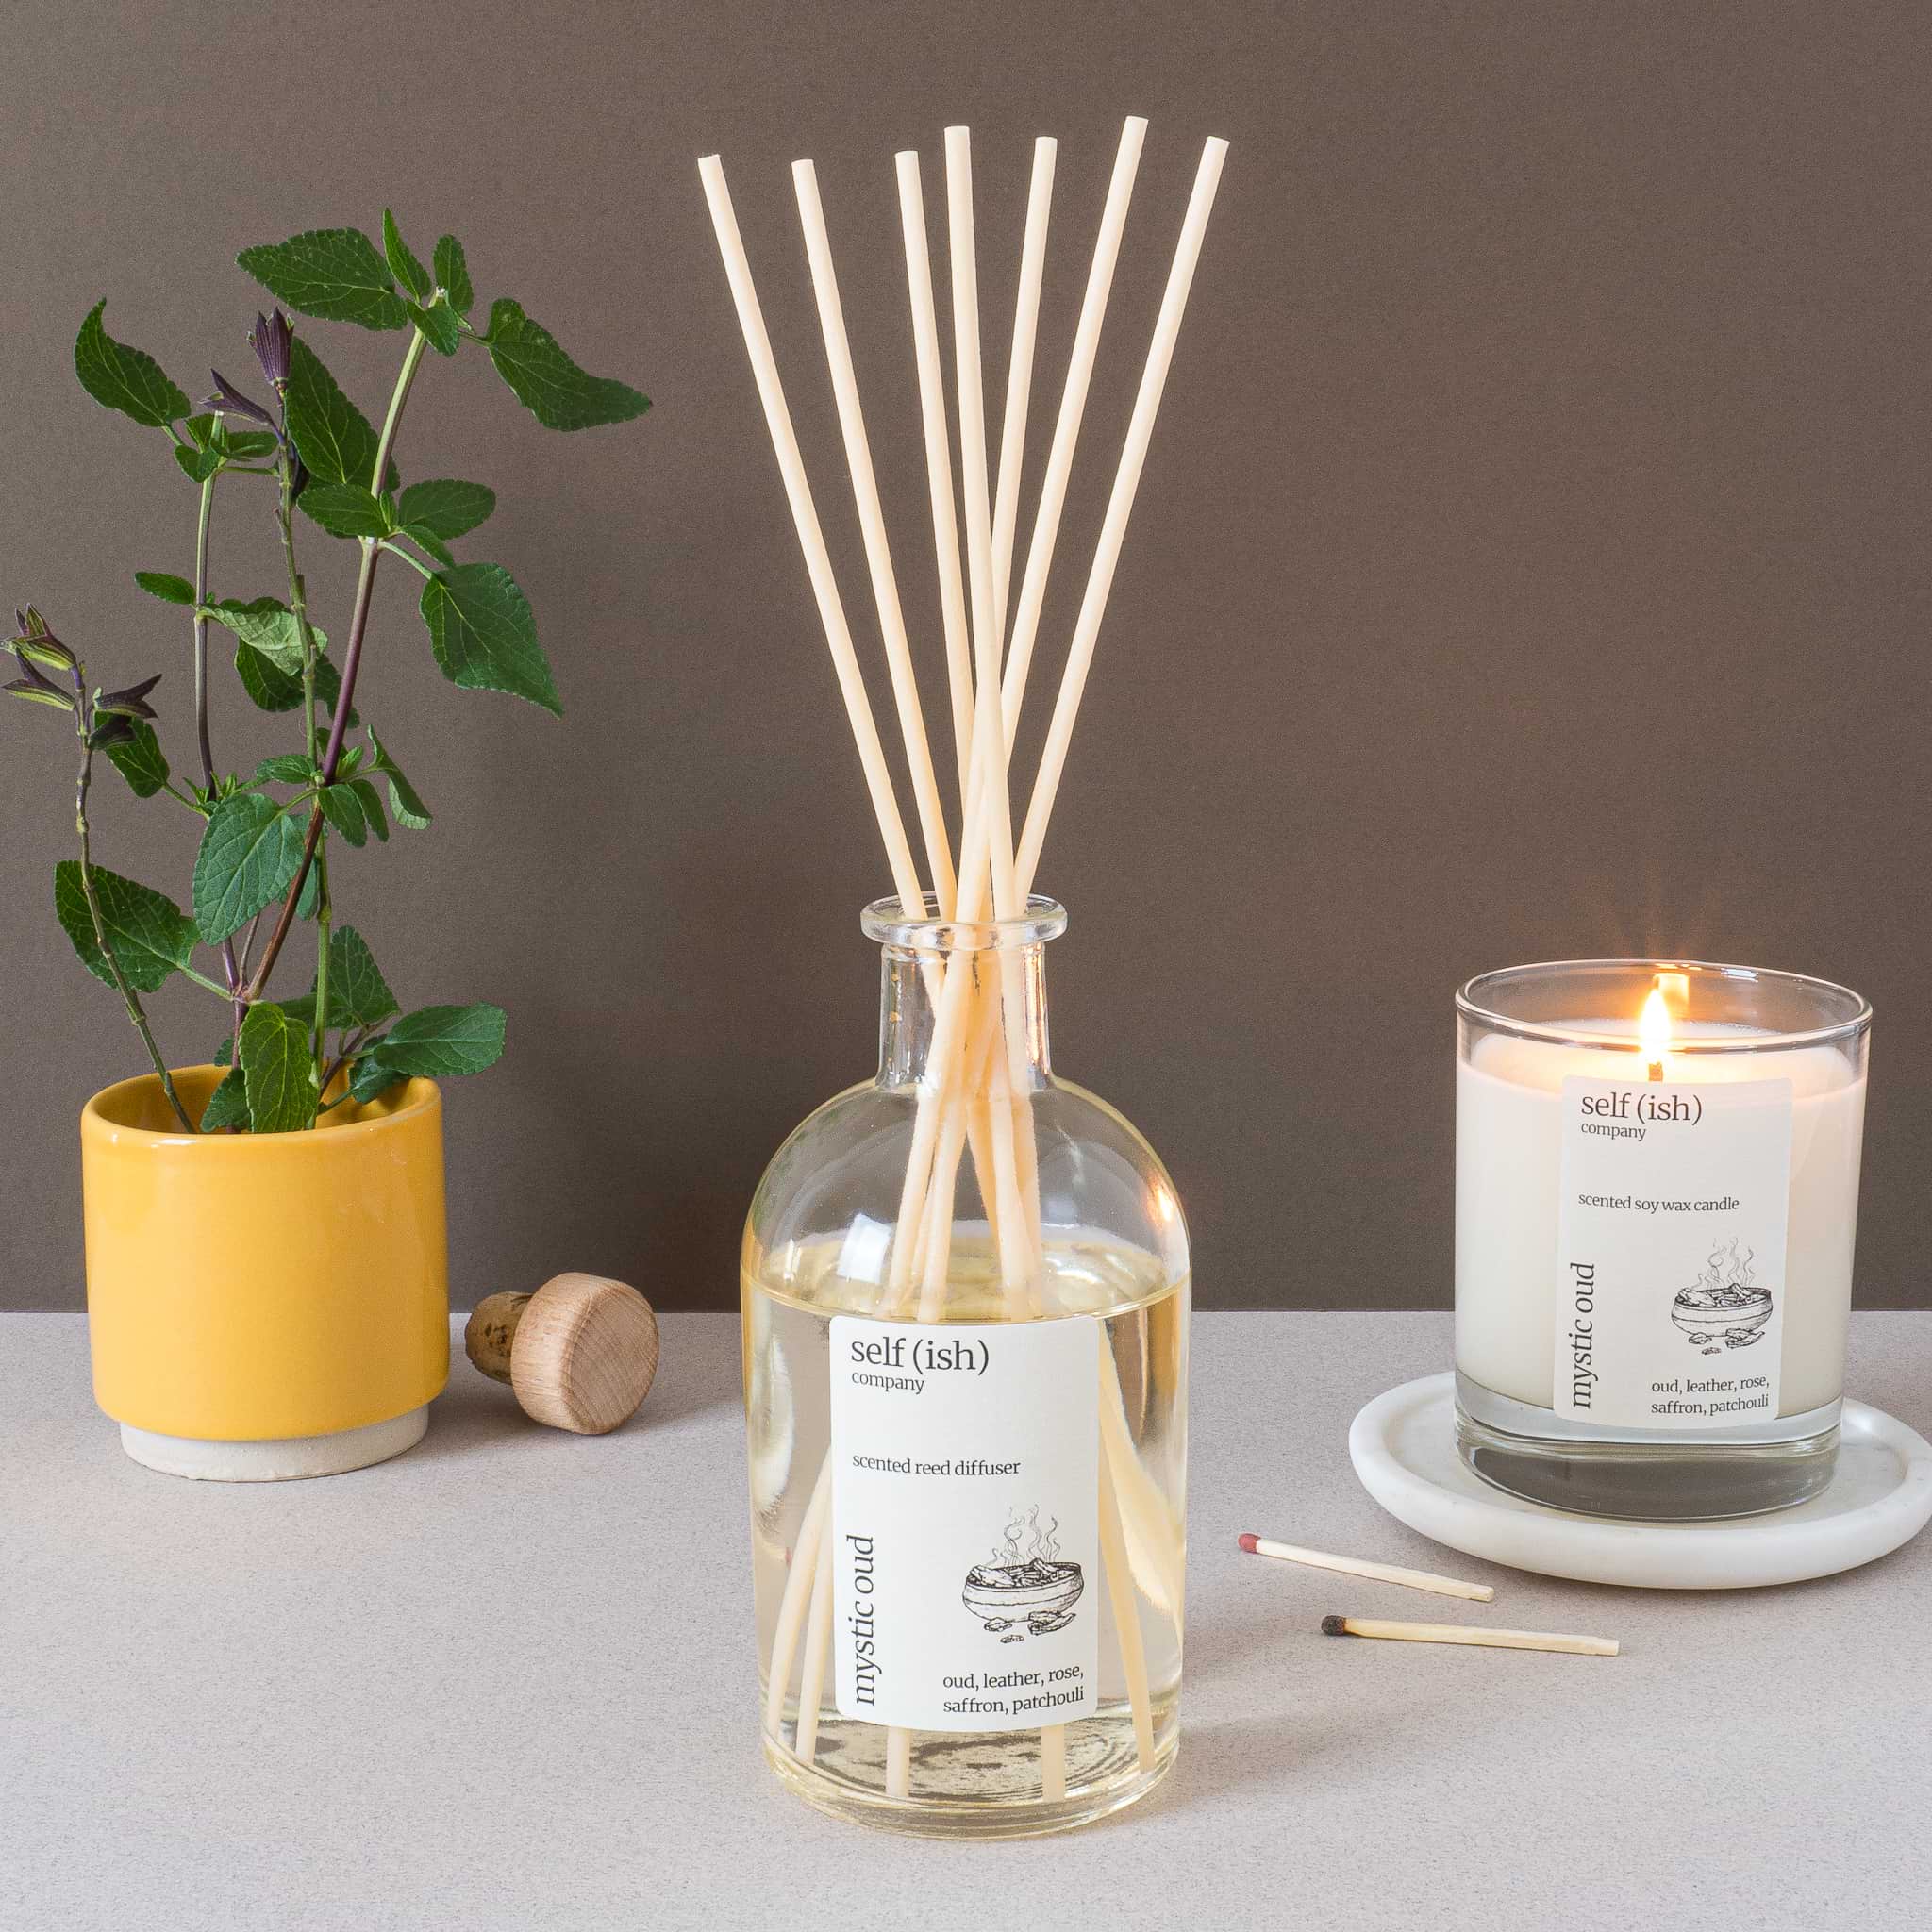 oud reed diffuser and oud scented candle